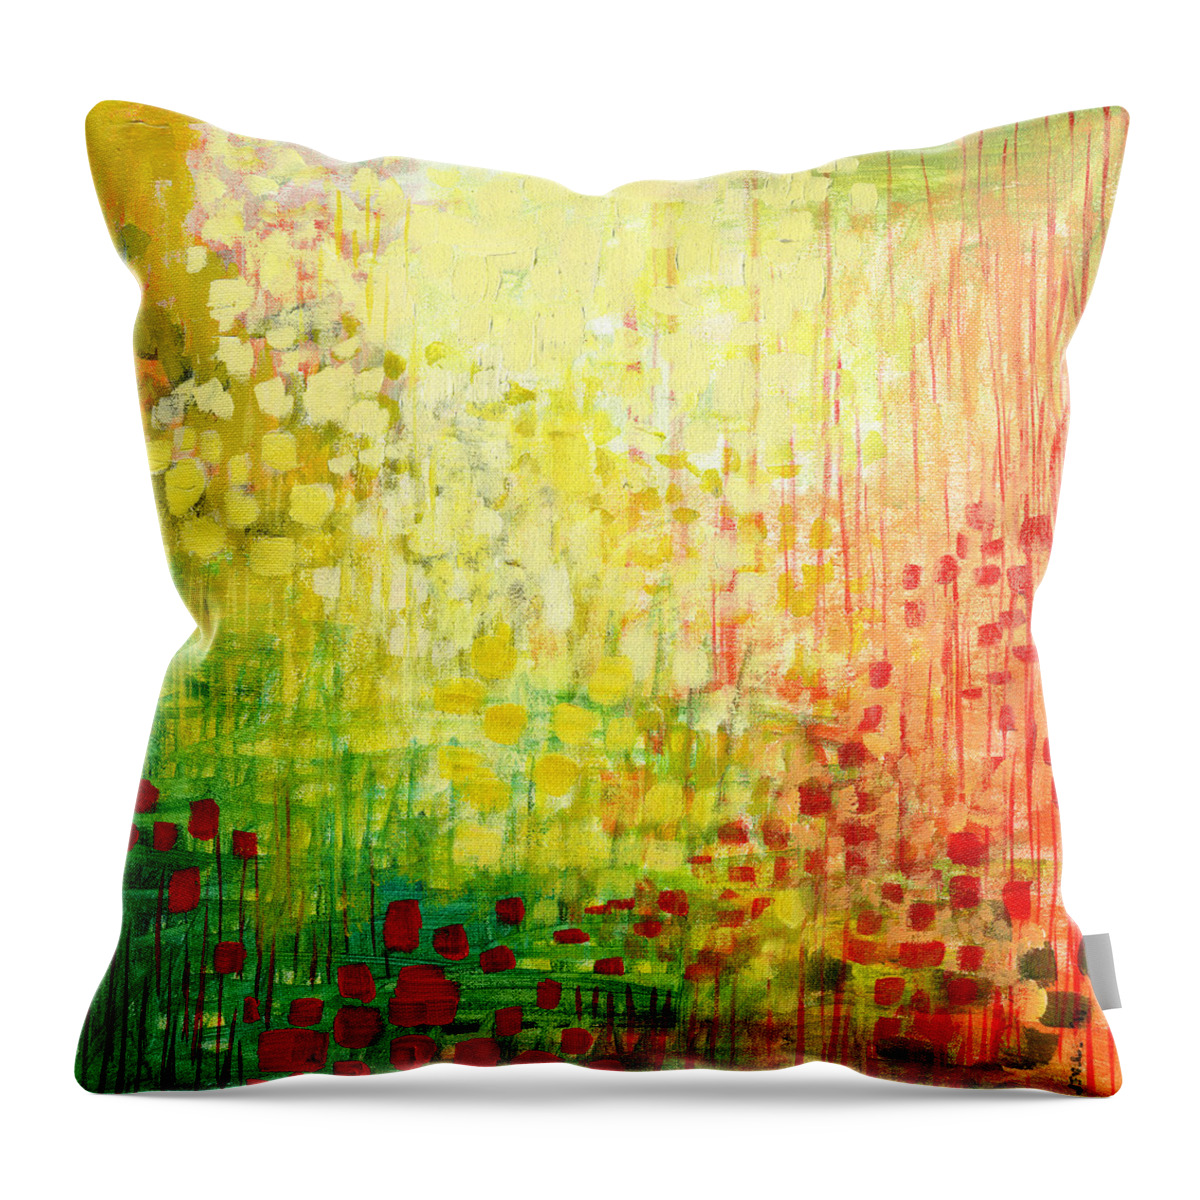 Abstract Throw Pillow featuring the painting Immersed No 2 by Jennifer Lommers